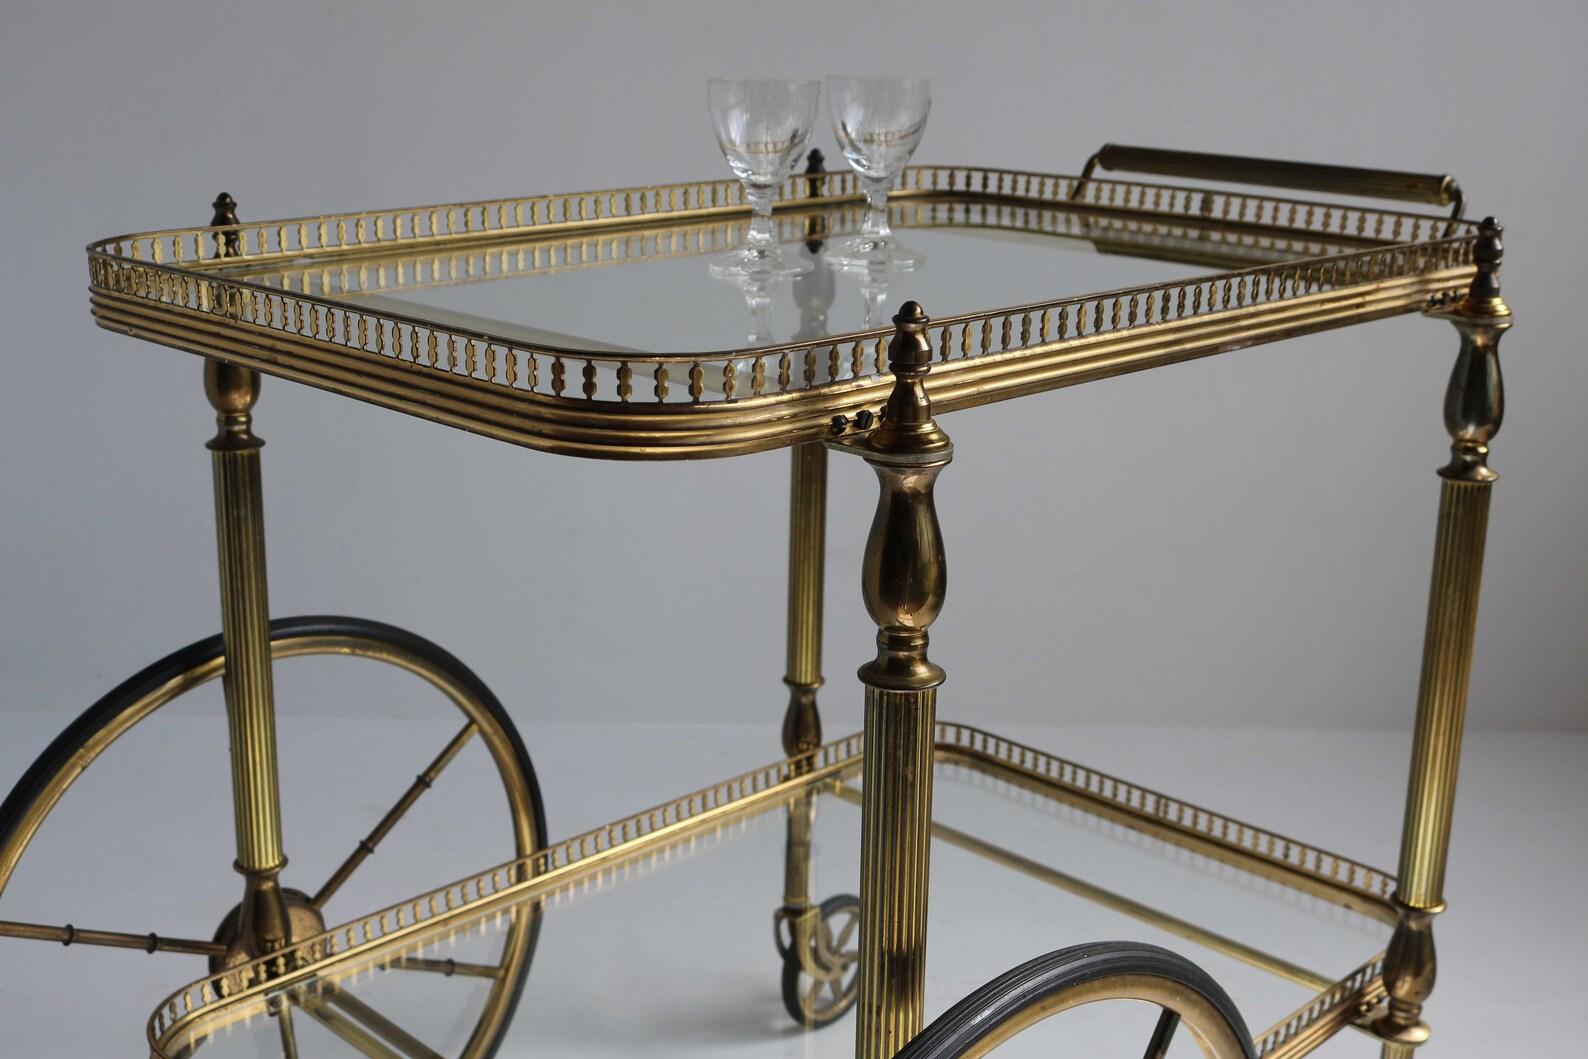 Large wheels bar cart midcentury golden brass serving trolley cocktail entertainment beverages tea cart clear glass Hollywood Regency, 1960s

Beautiful entertainer’s bar cart with two large wheels at one end.
Great for displaying your bar set, or